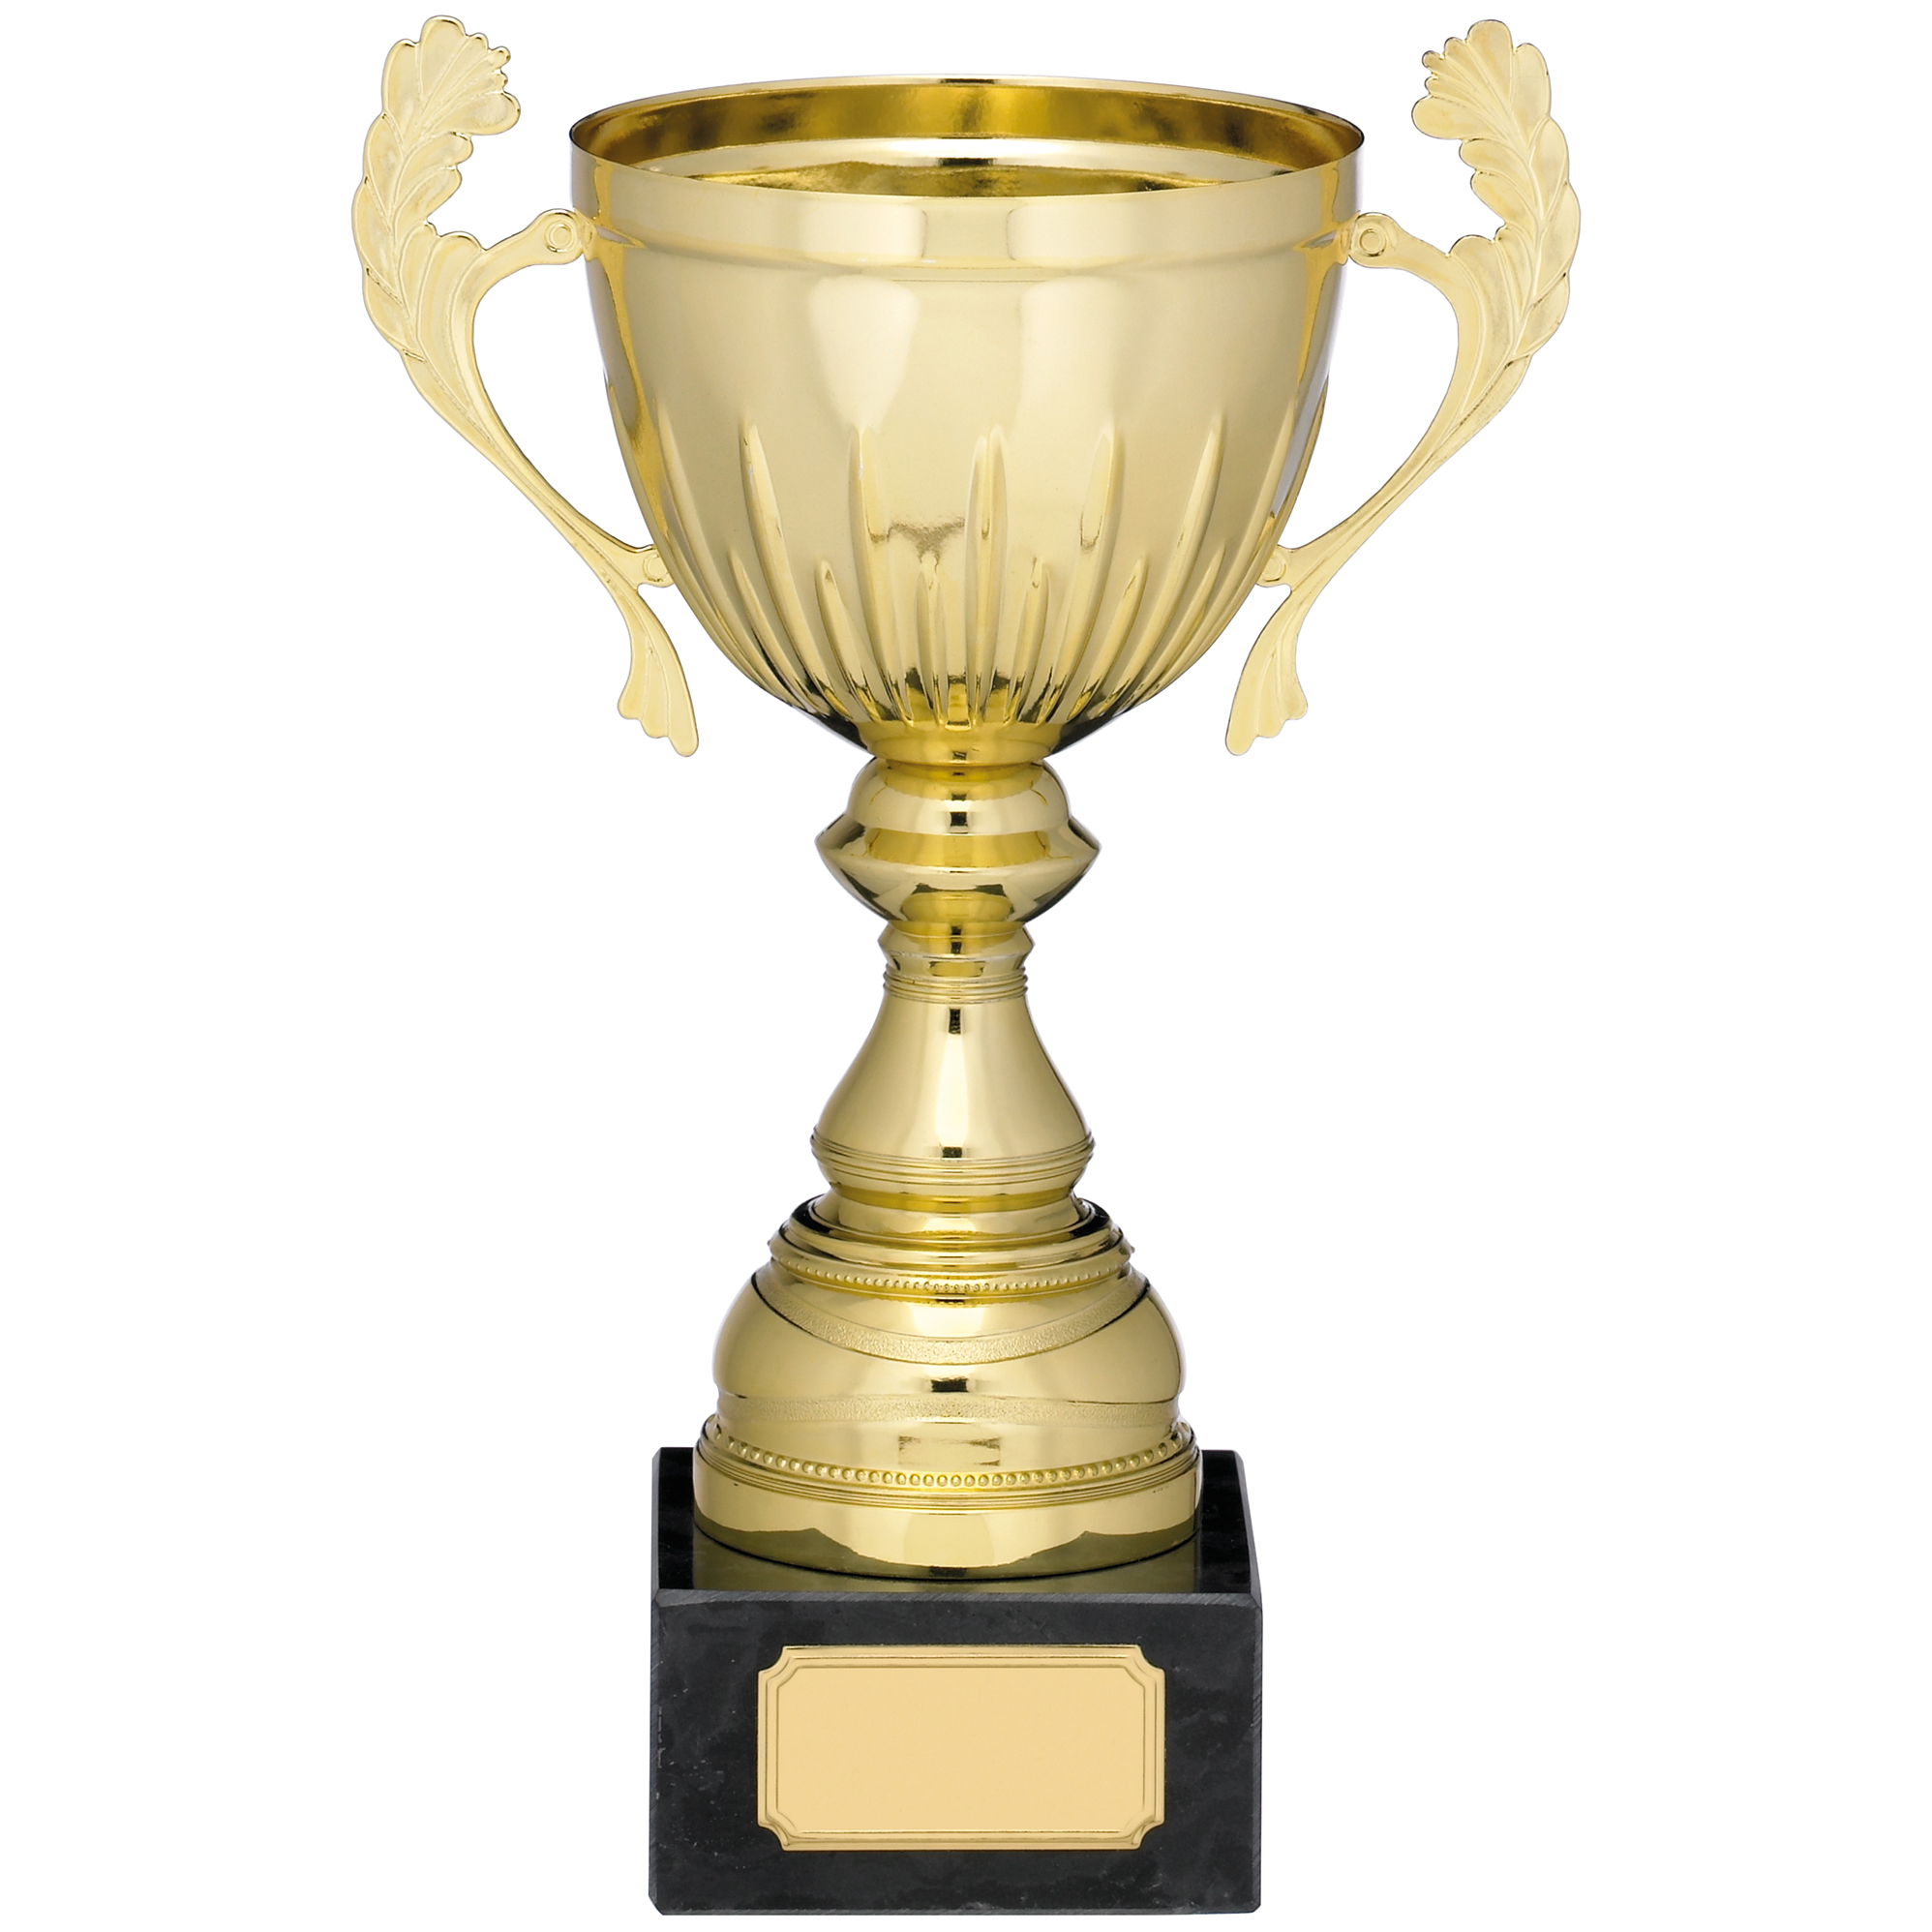 23cm GOLD CUP TROPHY WITH HANDLES